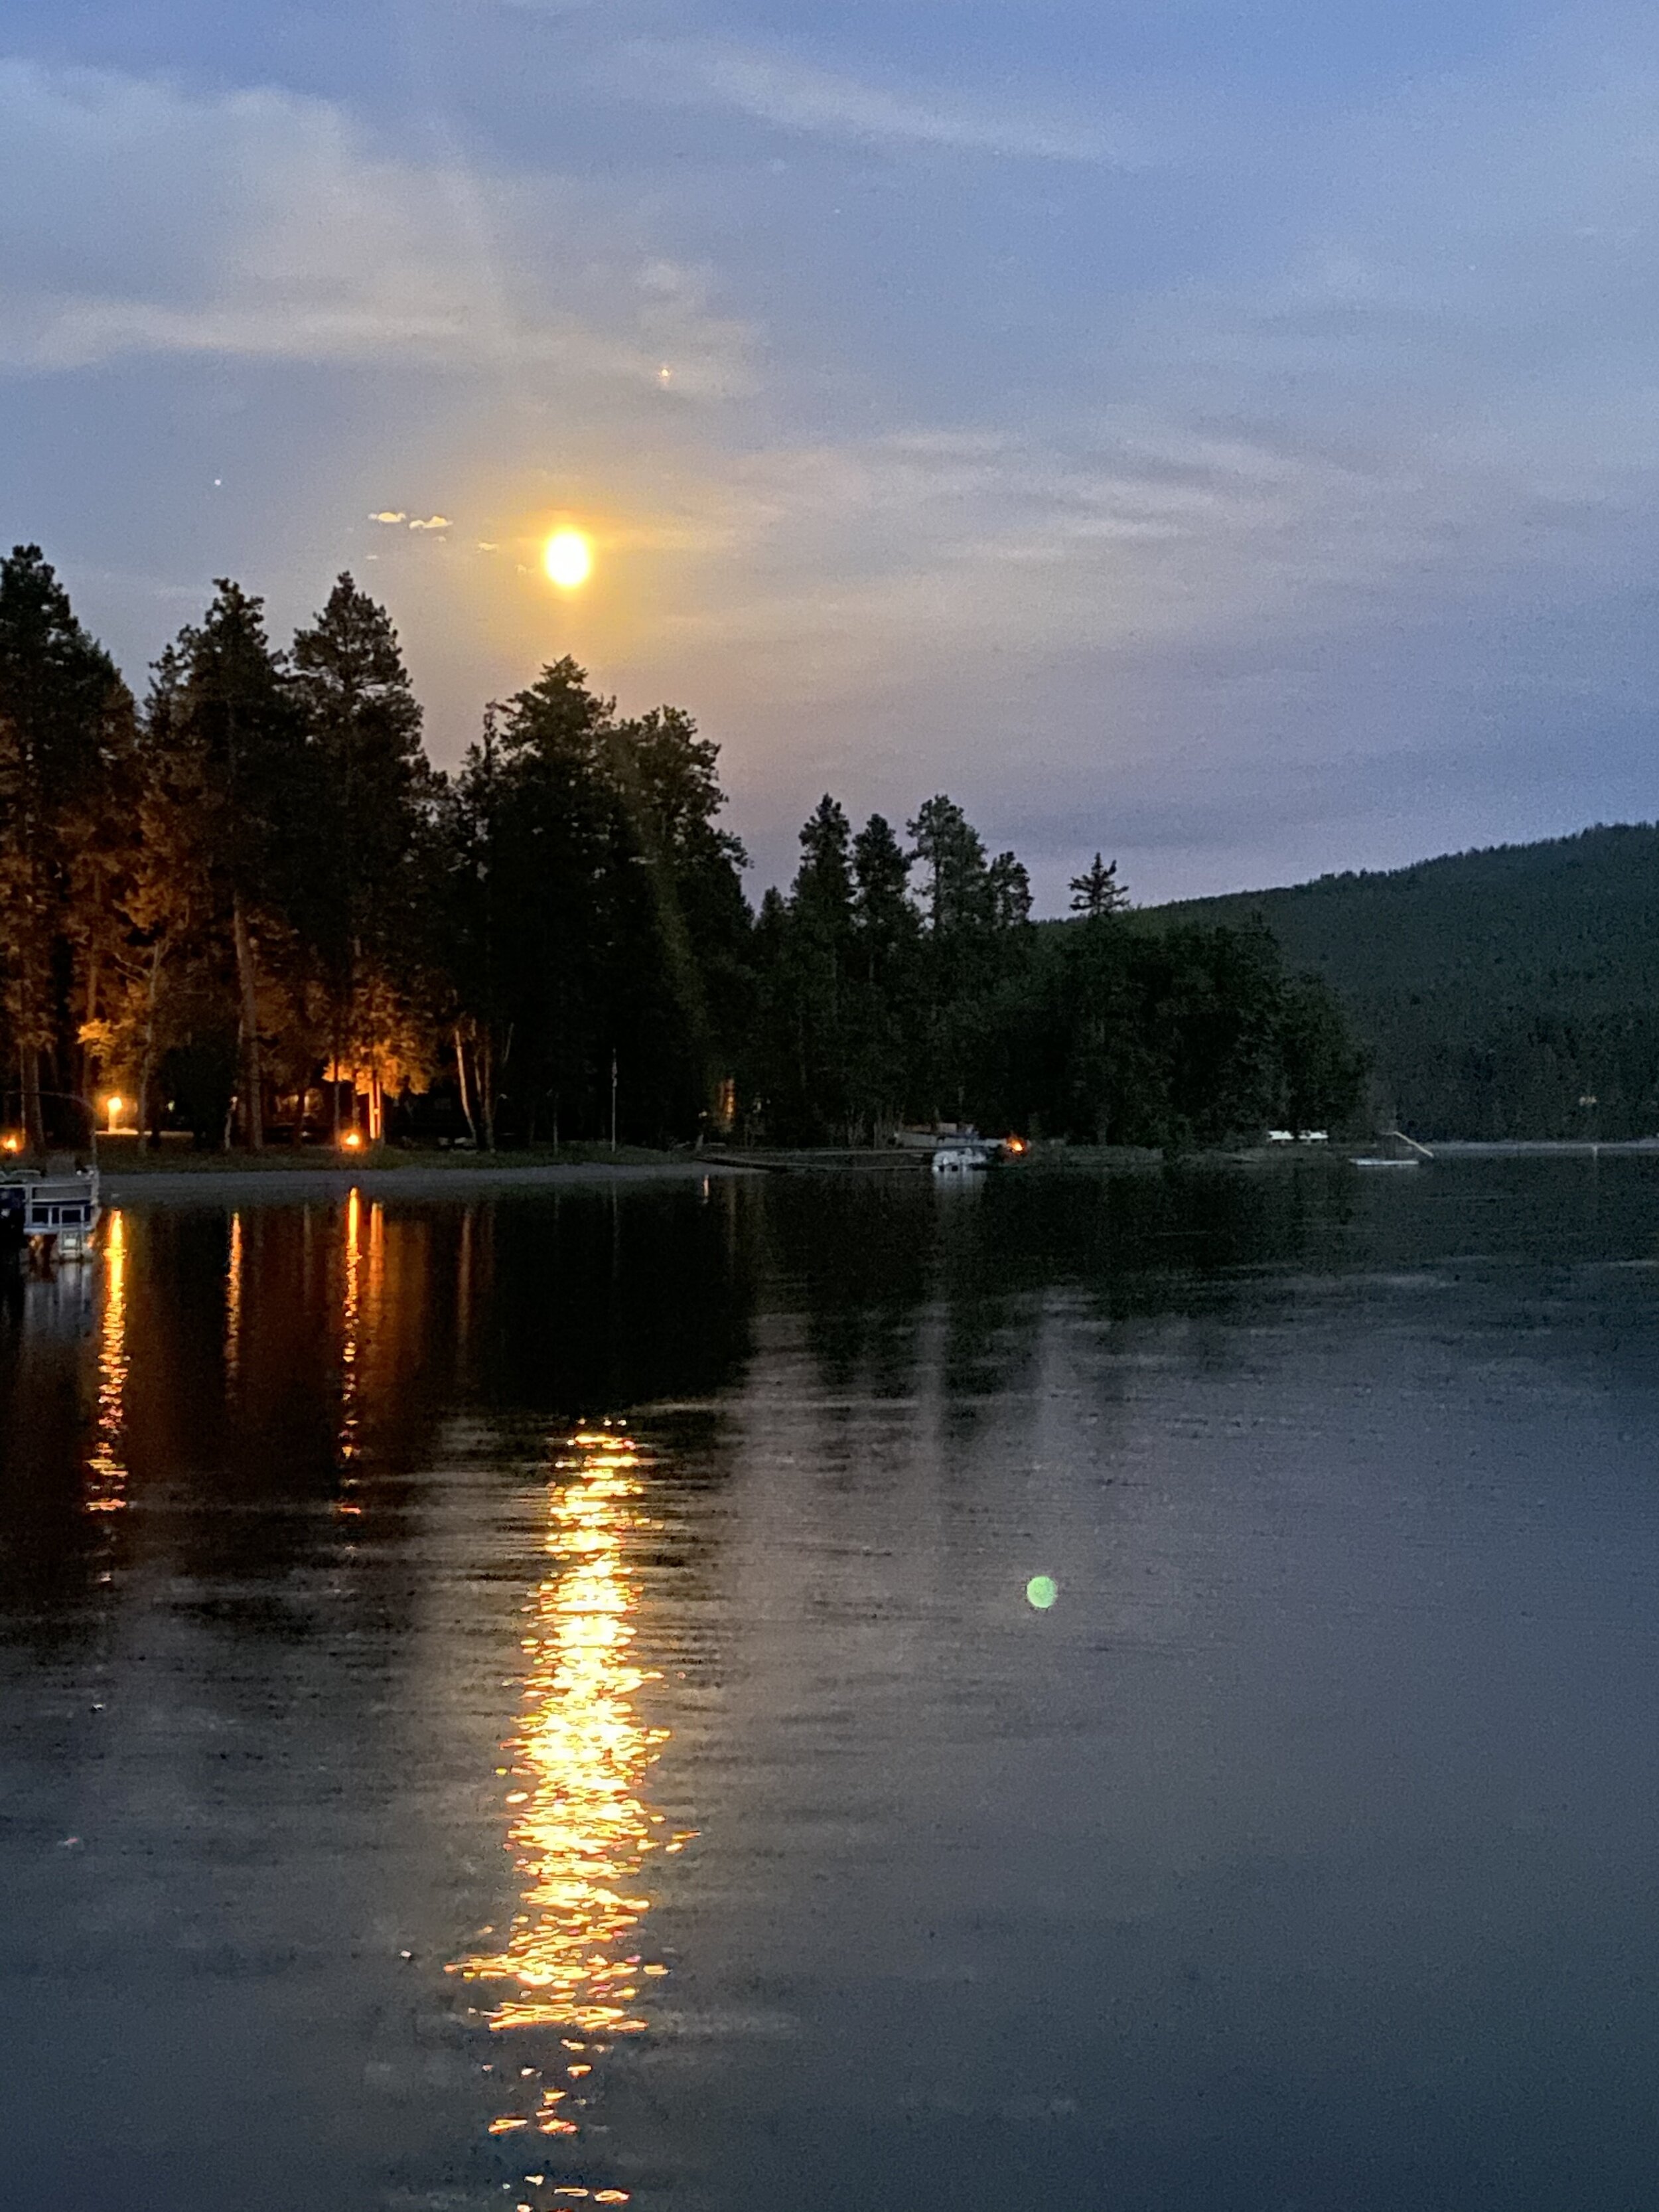  Full moon reflection taken this month while out on the Kootenai boat. Amazing! 